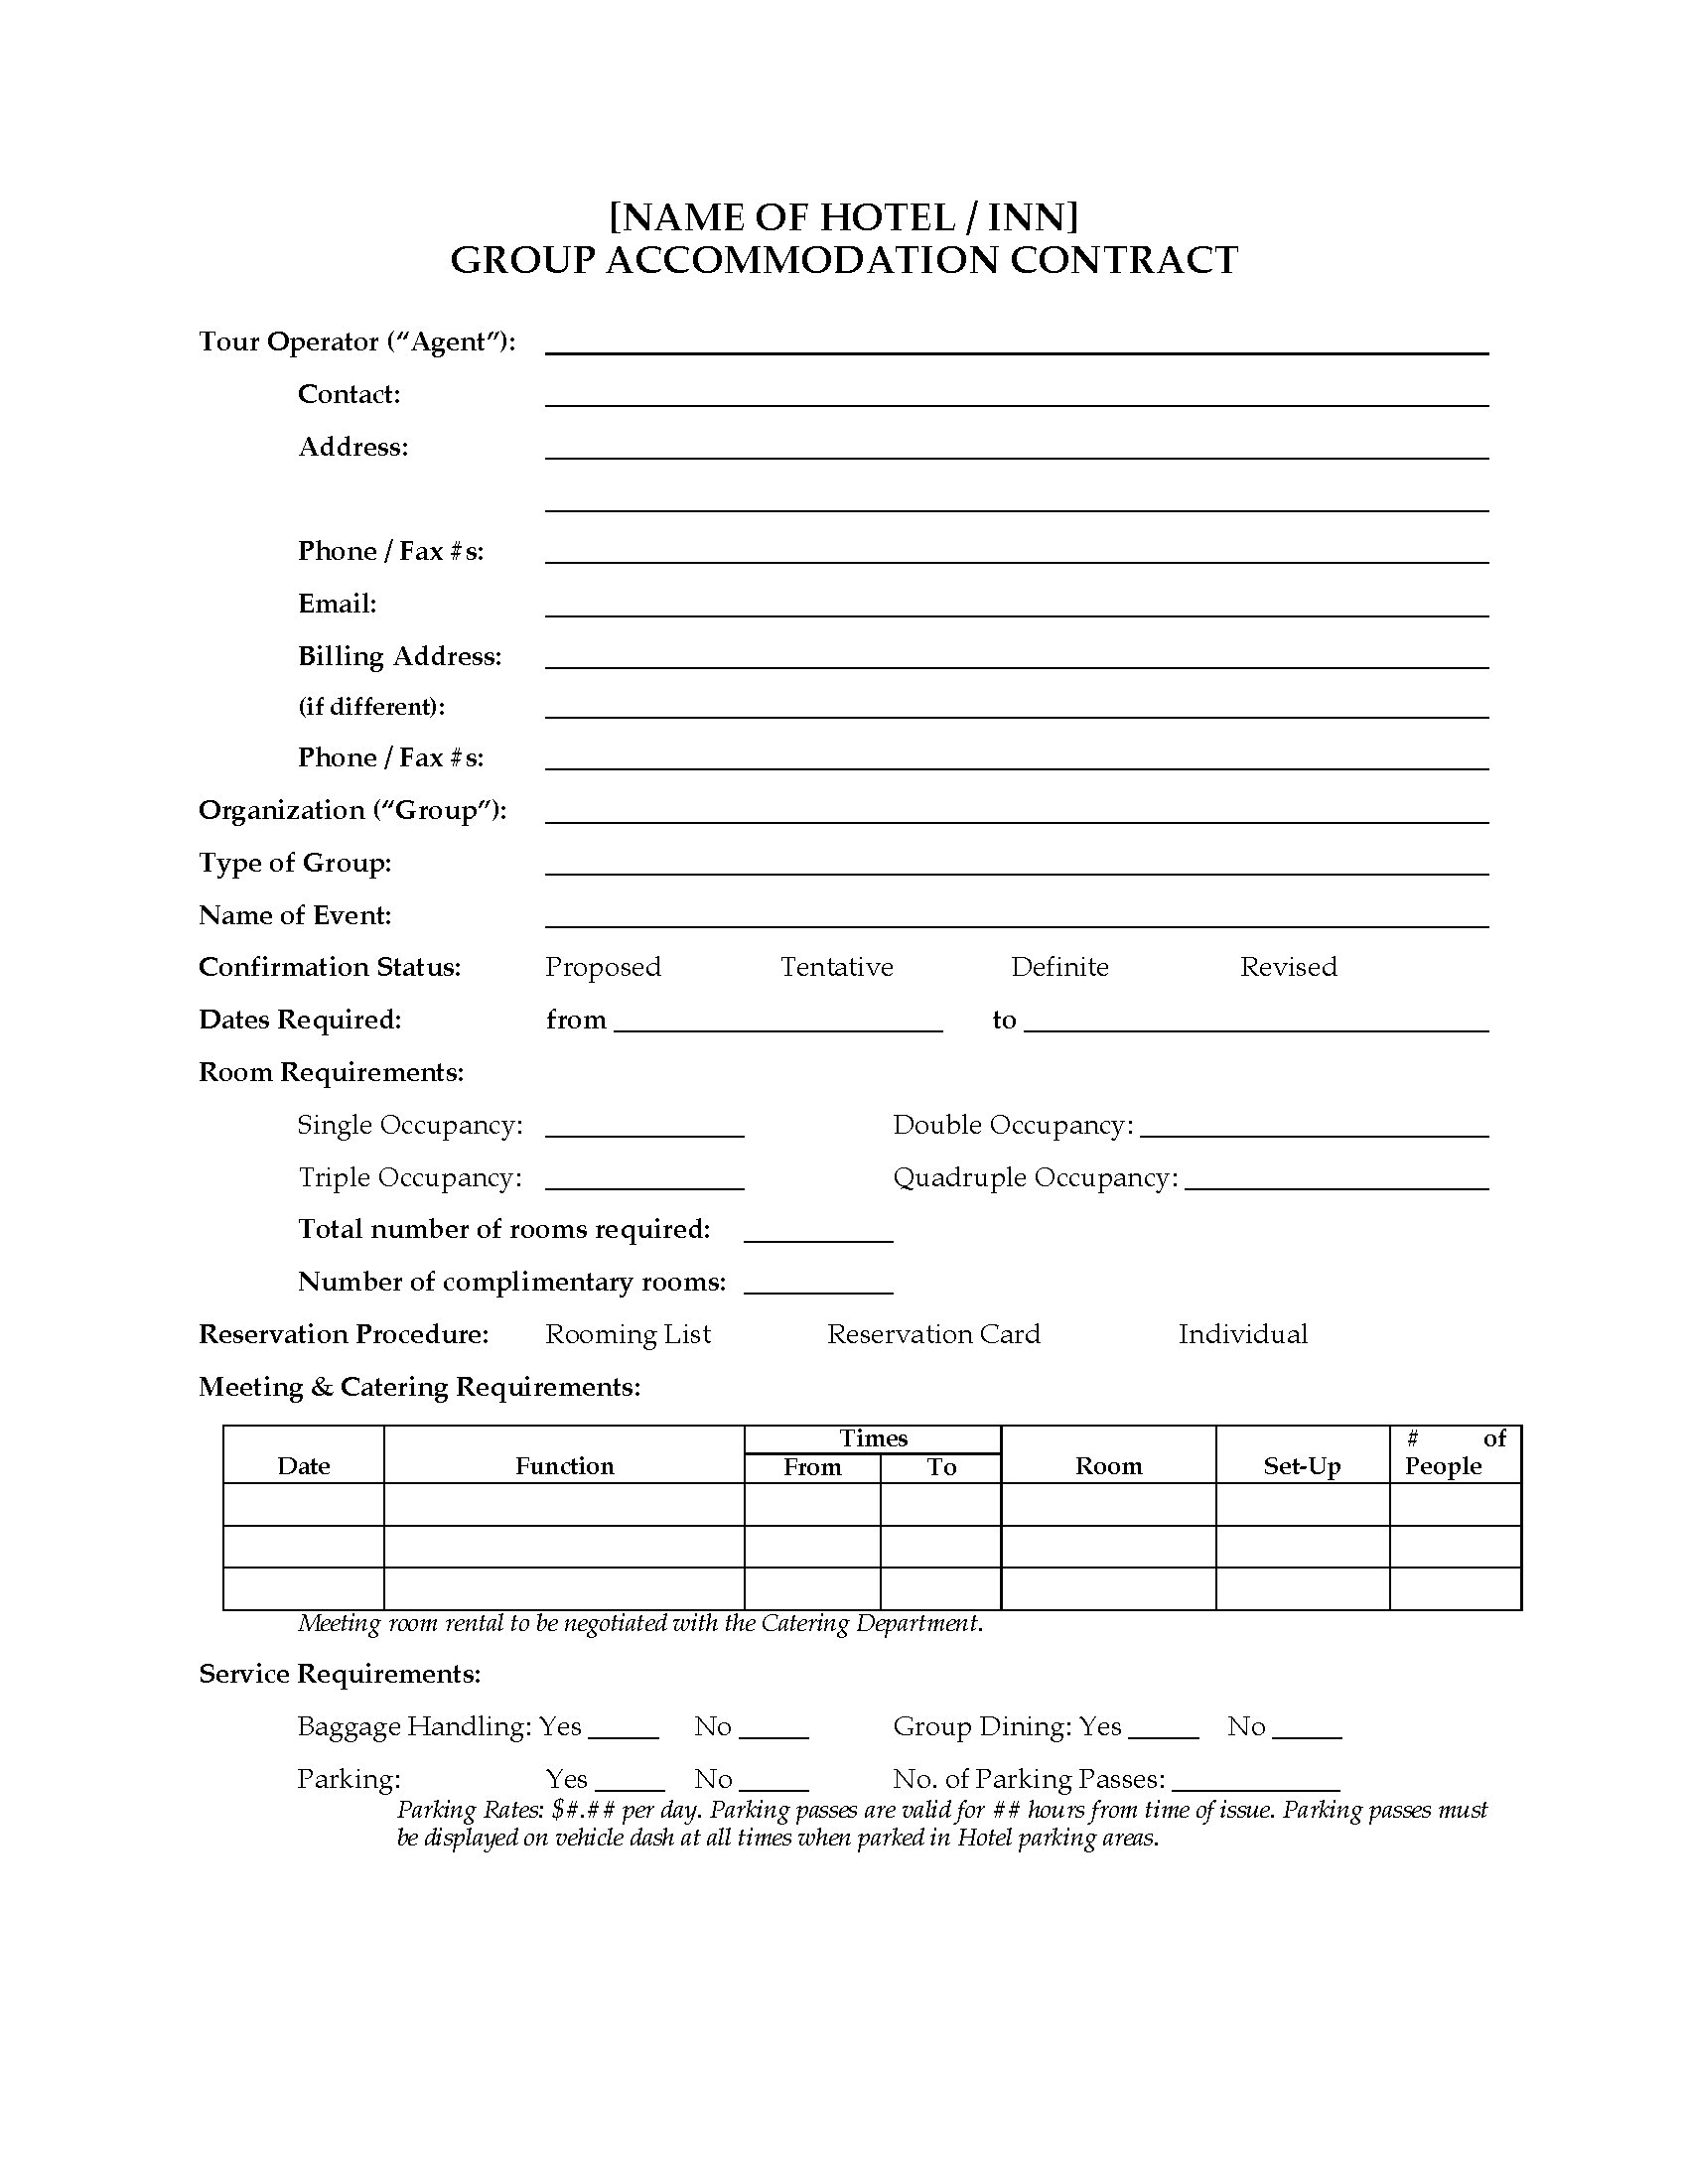 0004147 Hotel Group Accommodation Contract 